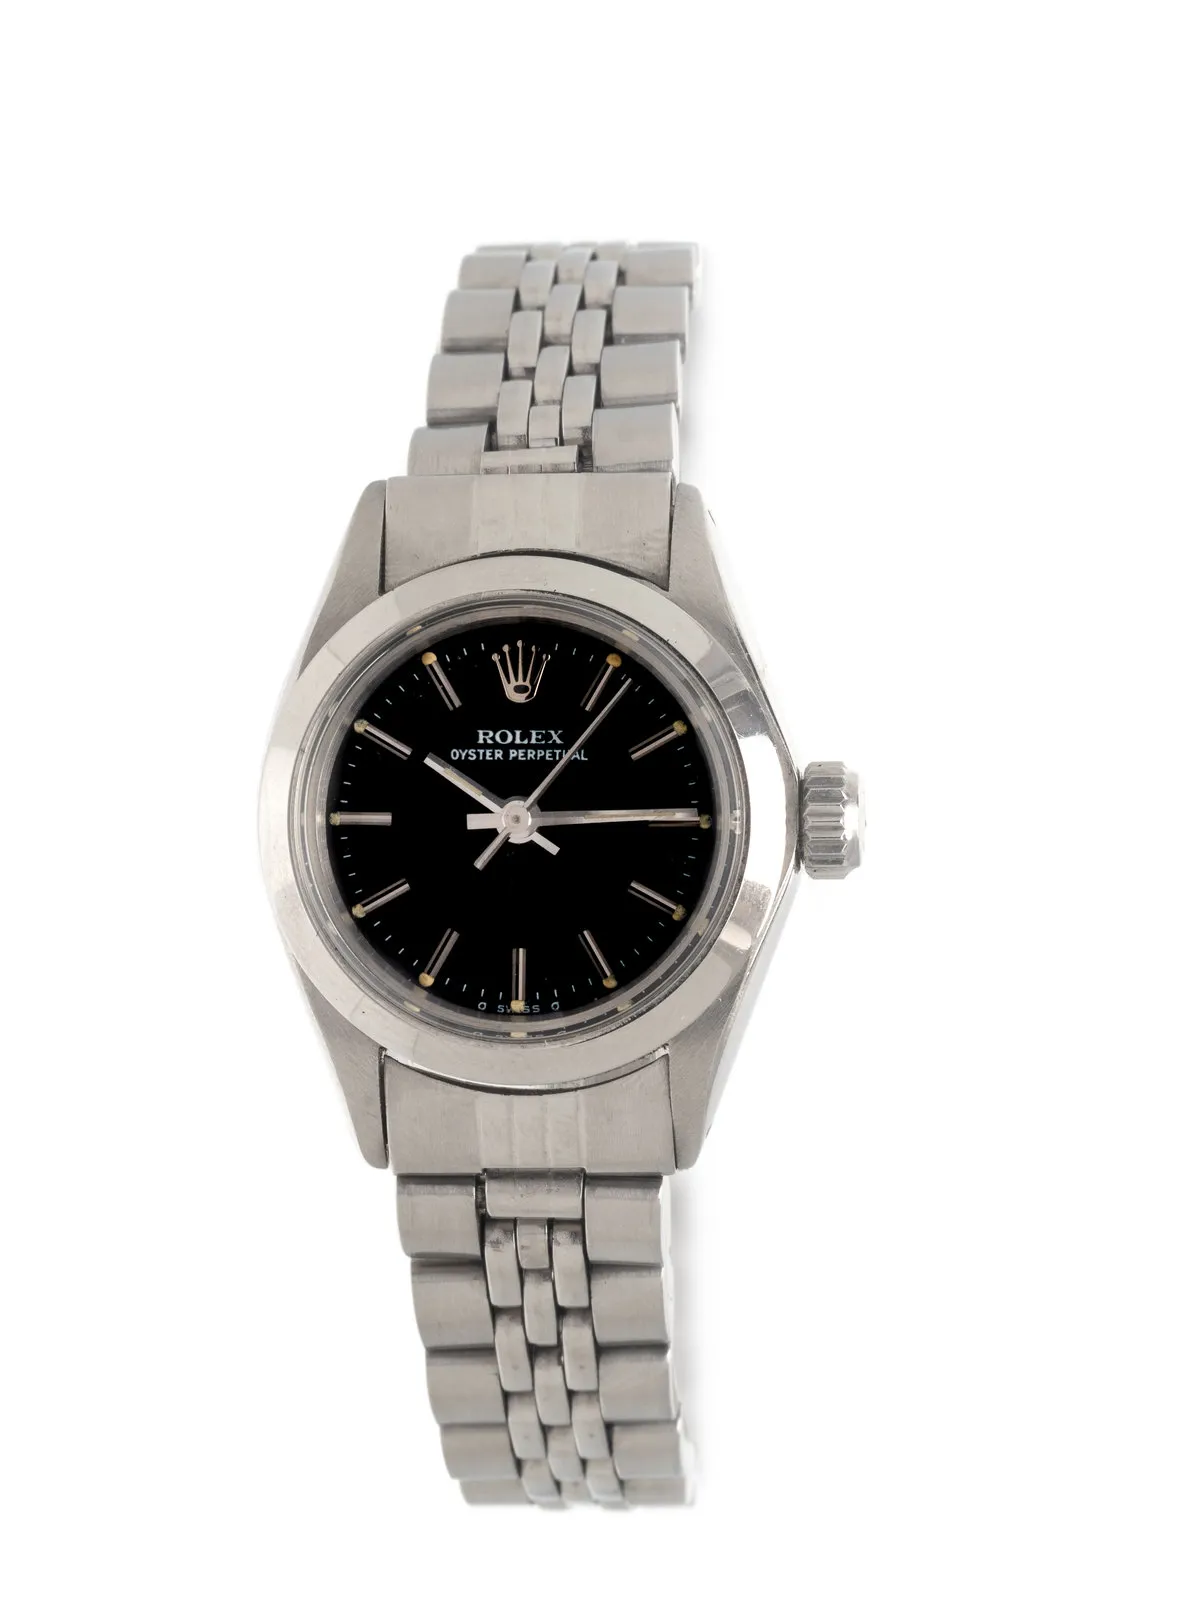 Rolex Oyster Perpetual 26 6718 24mm Stainless steel Black